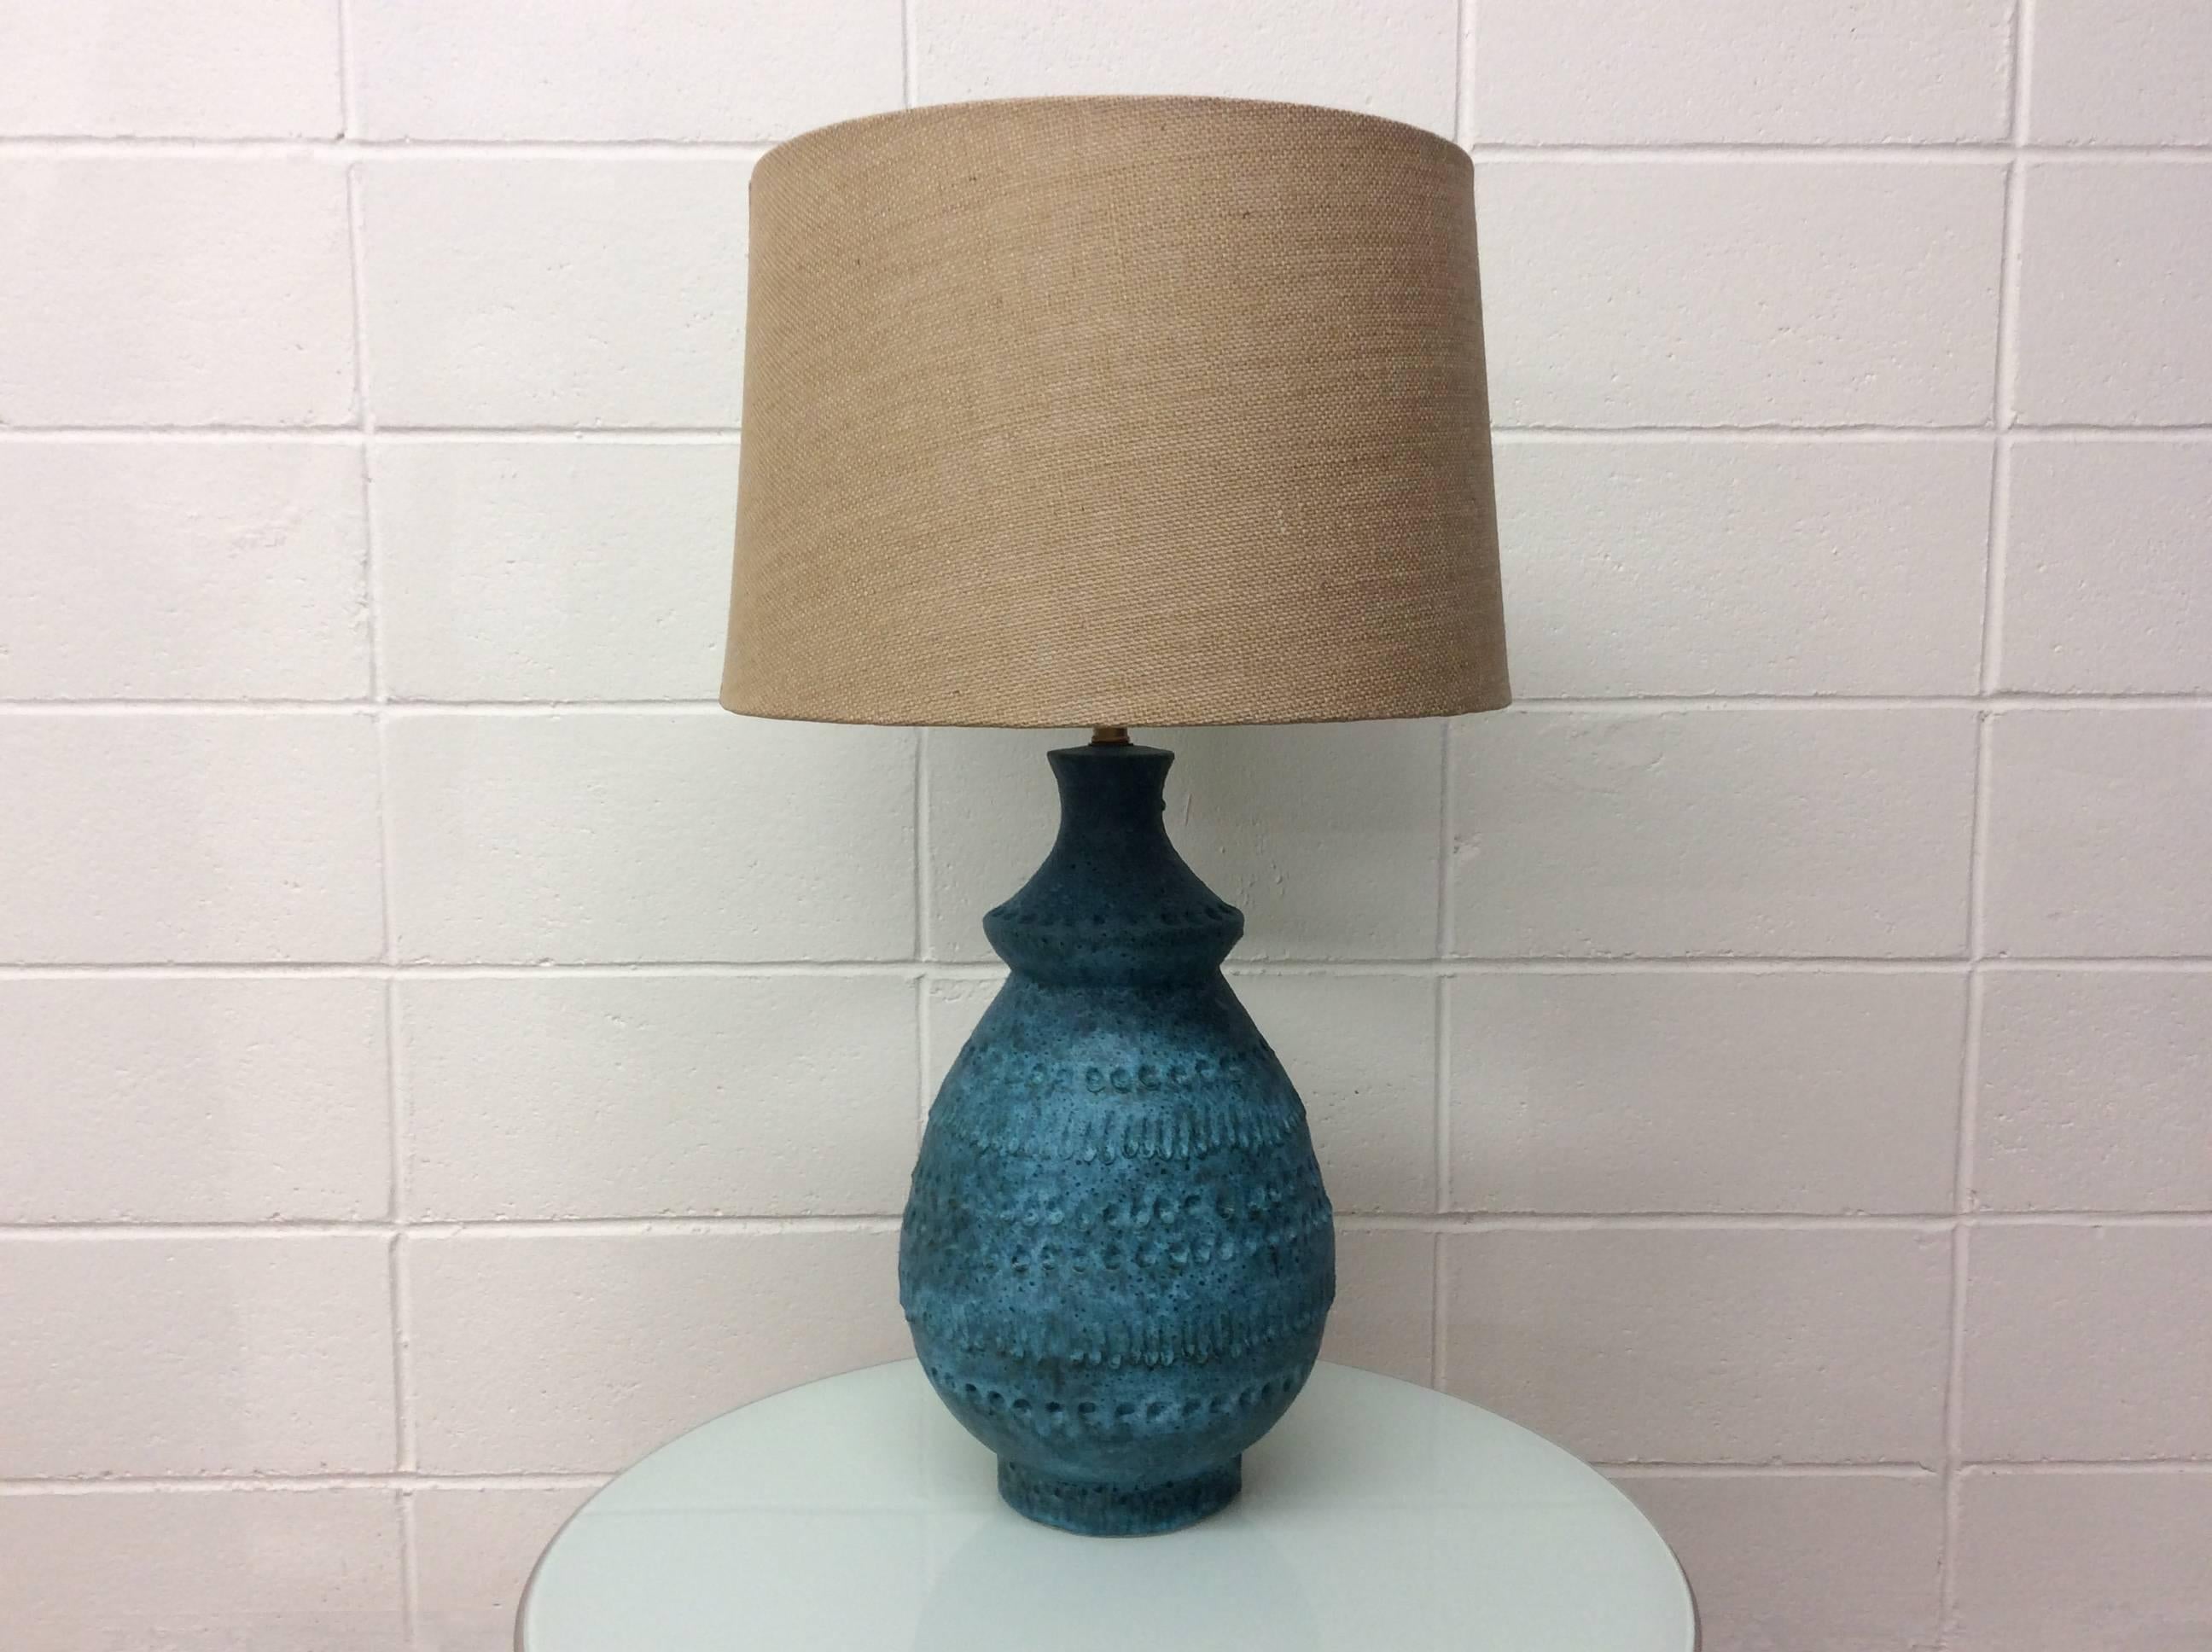 Mid-Century Modern Italian ceramic lamp in blue with the teardrop or lacrima pattern. Believed to be Bitossi. Signature not found. The lamp has new wiring and a new shade. 
No known issues. Ready for use.

Shade dimensions
15